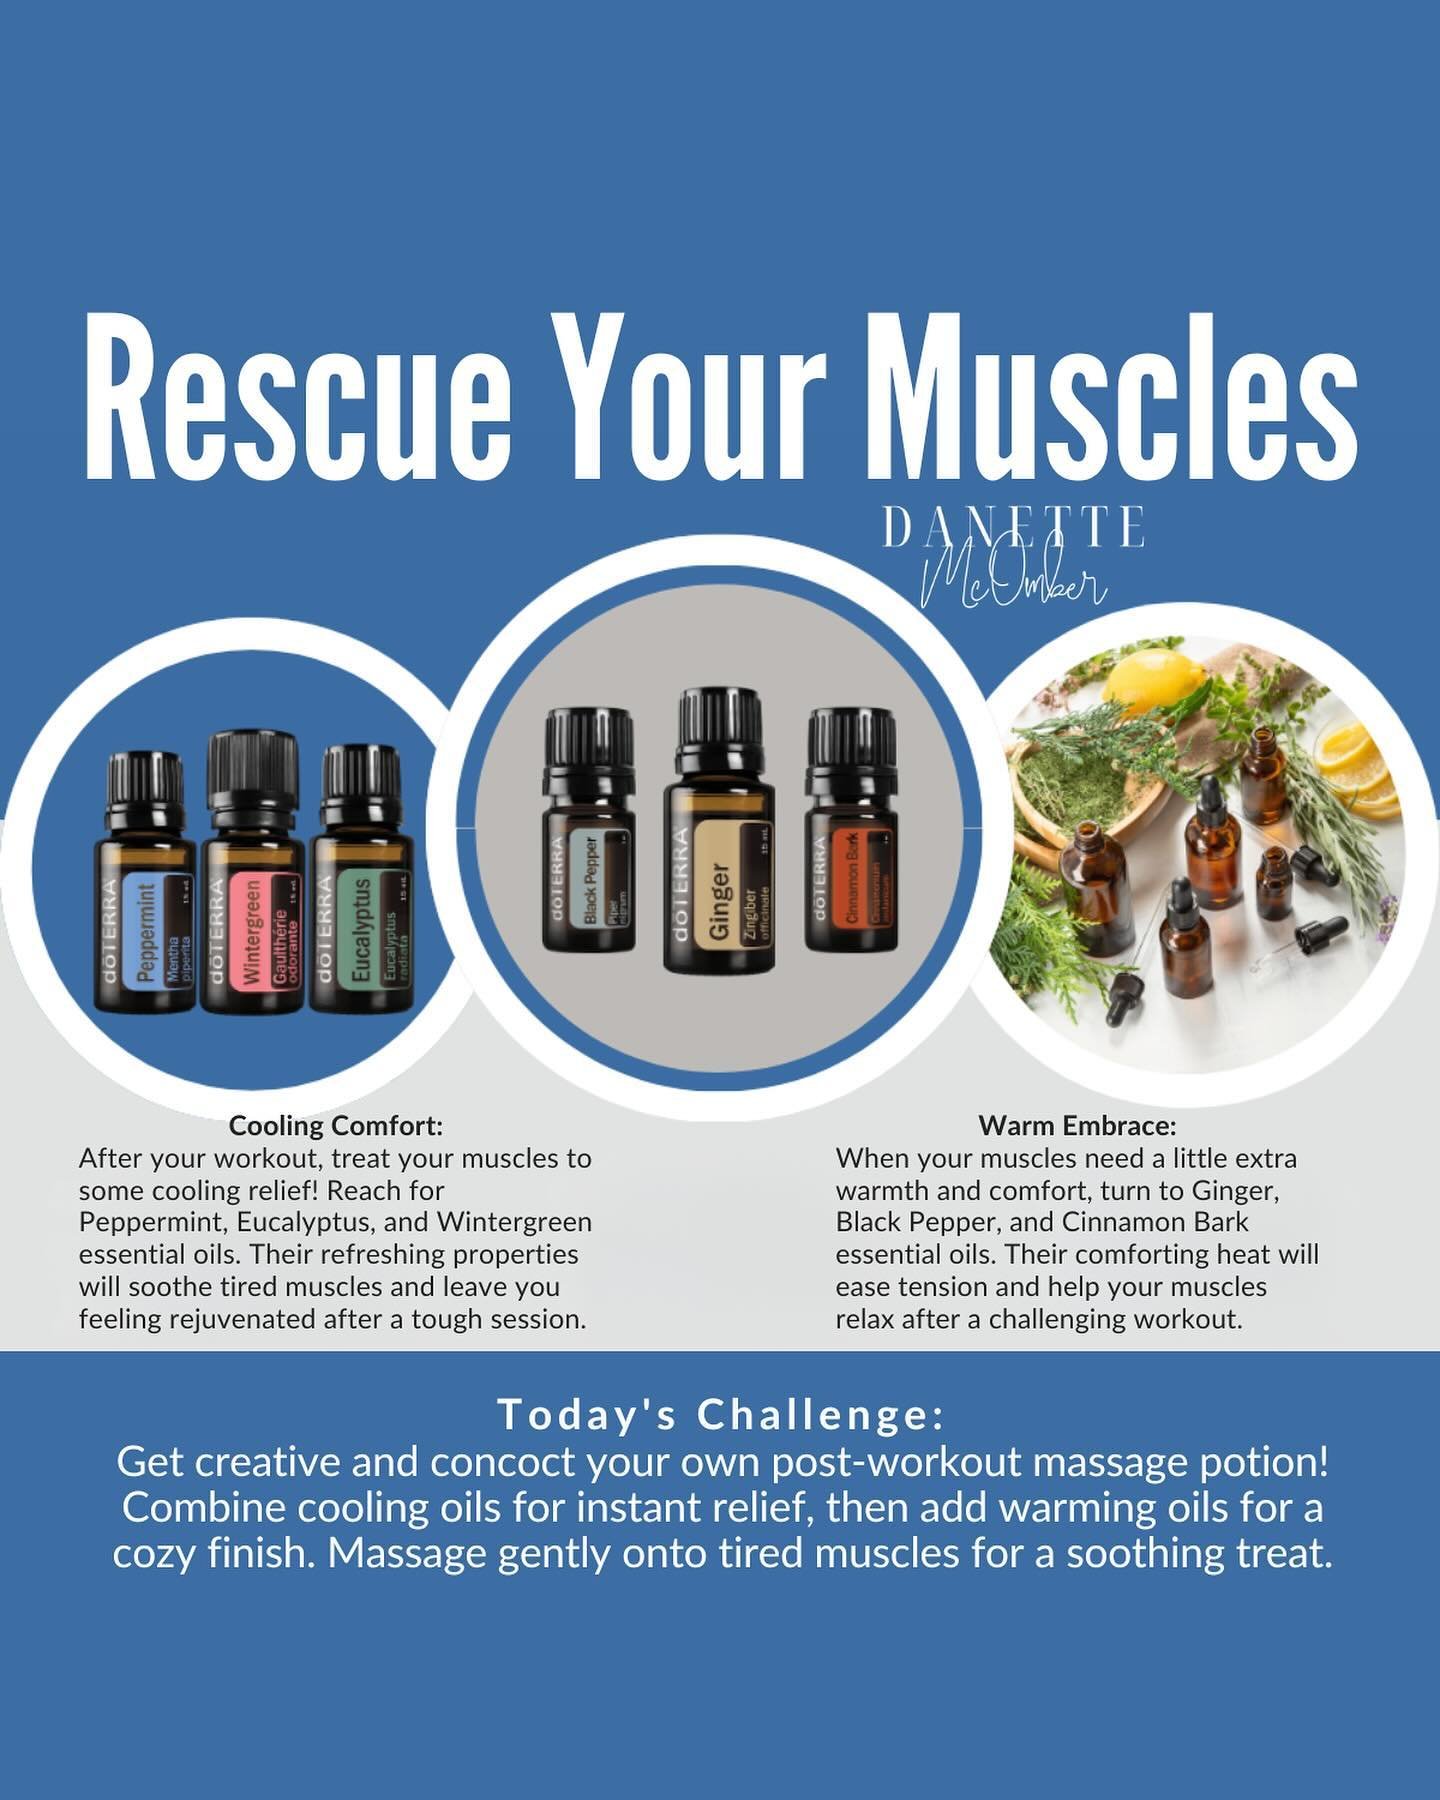 🌟 **Muscle Relief Magic!** 🌟

You&rsquo;ve rocked your workout, but now your muscles are calling for some extra love. Whether you&rsquo;ve crushed a gym session, conquered miles, or nailed those yoga poses, it&rsquo;s time to show those muscles som